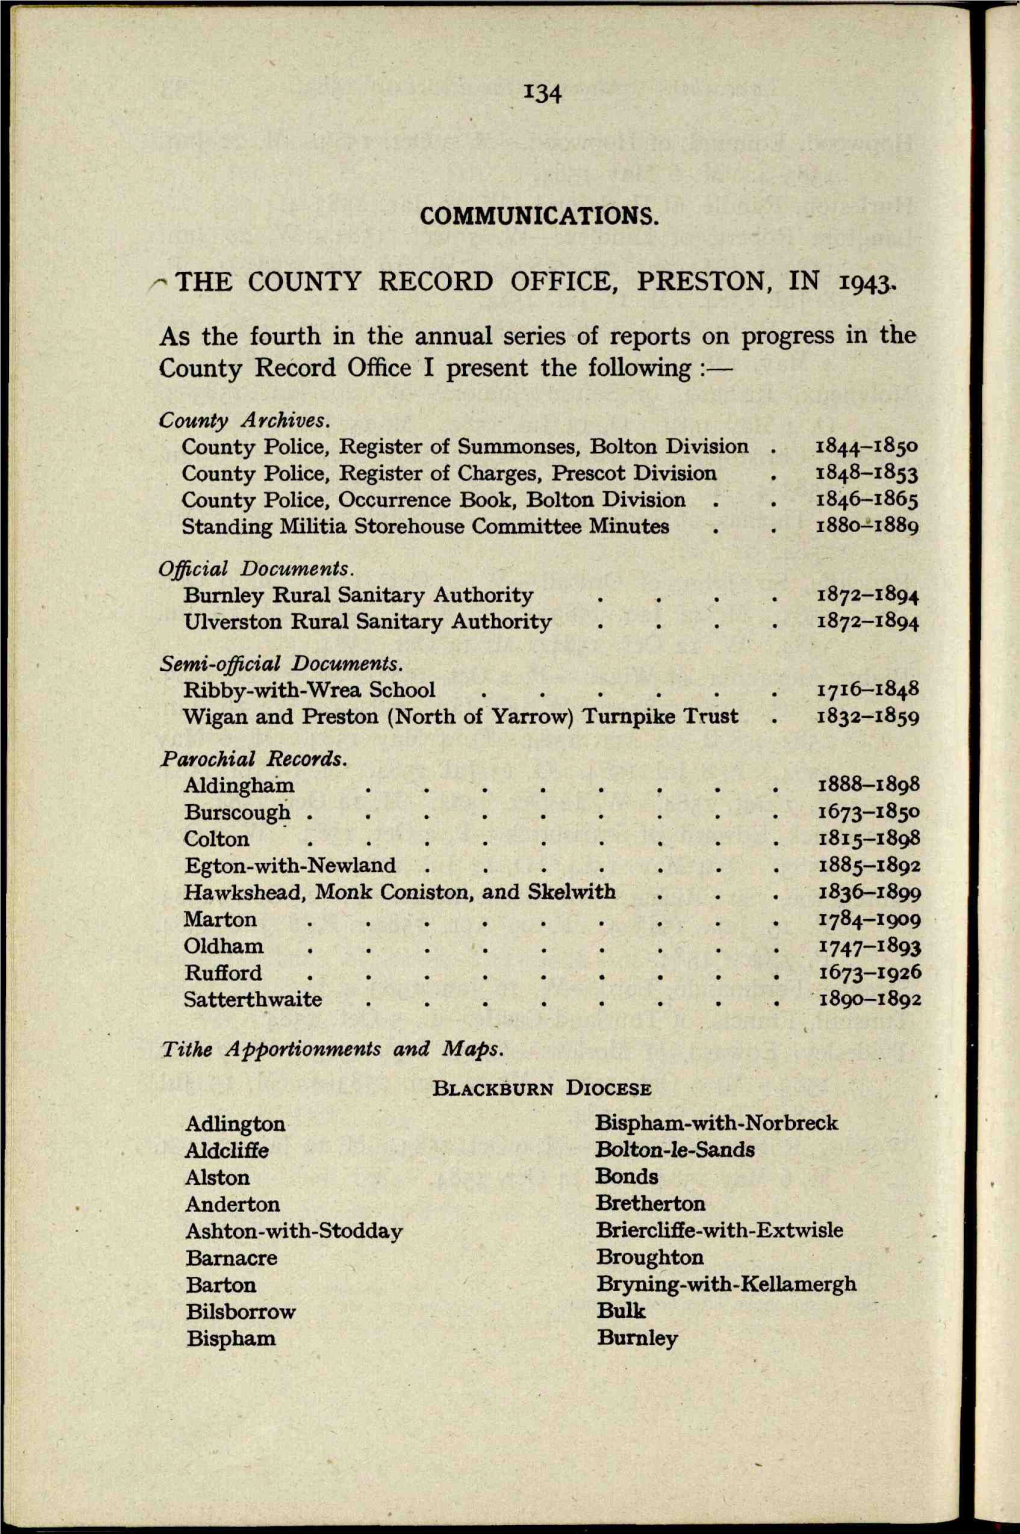 THE COUNTY RECORD OFFICE, PRESTON, in 1943. As the Fourth in the Annual Series of Reports on Progress in the County Record Office I Present the Following